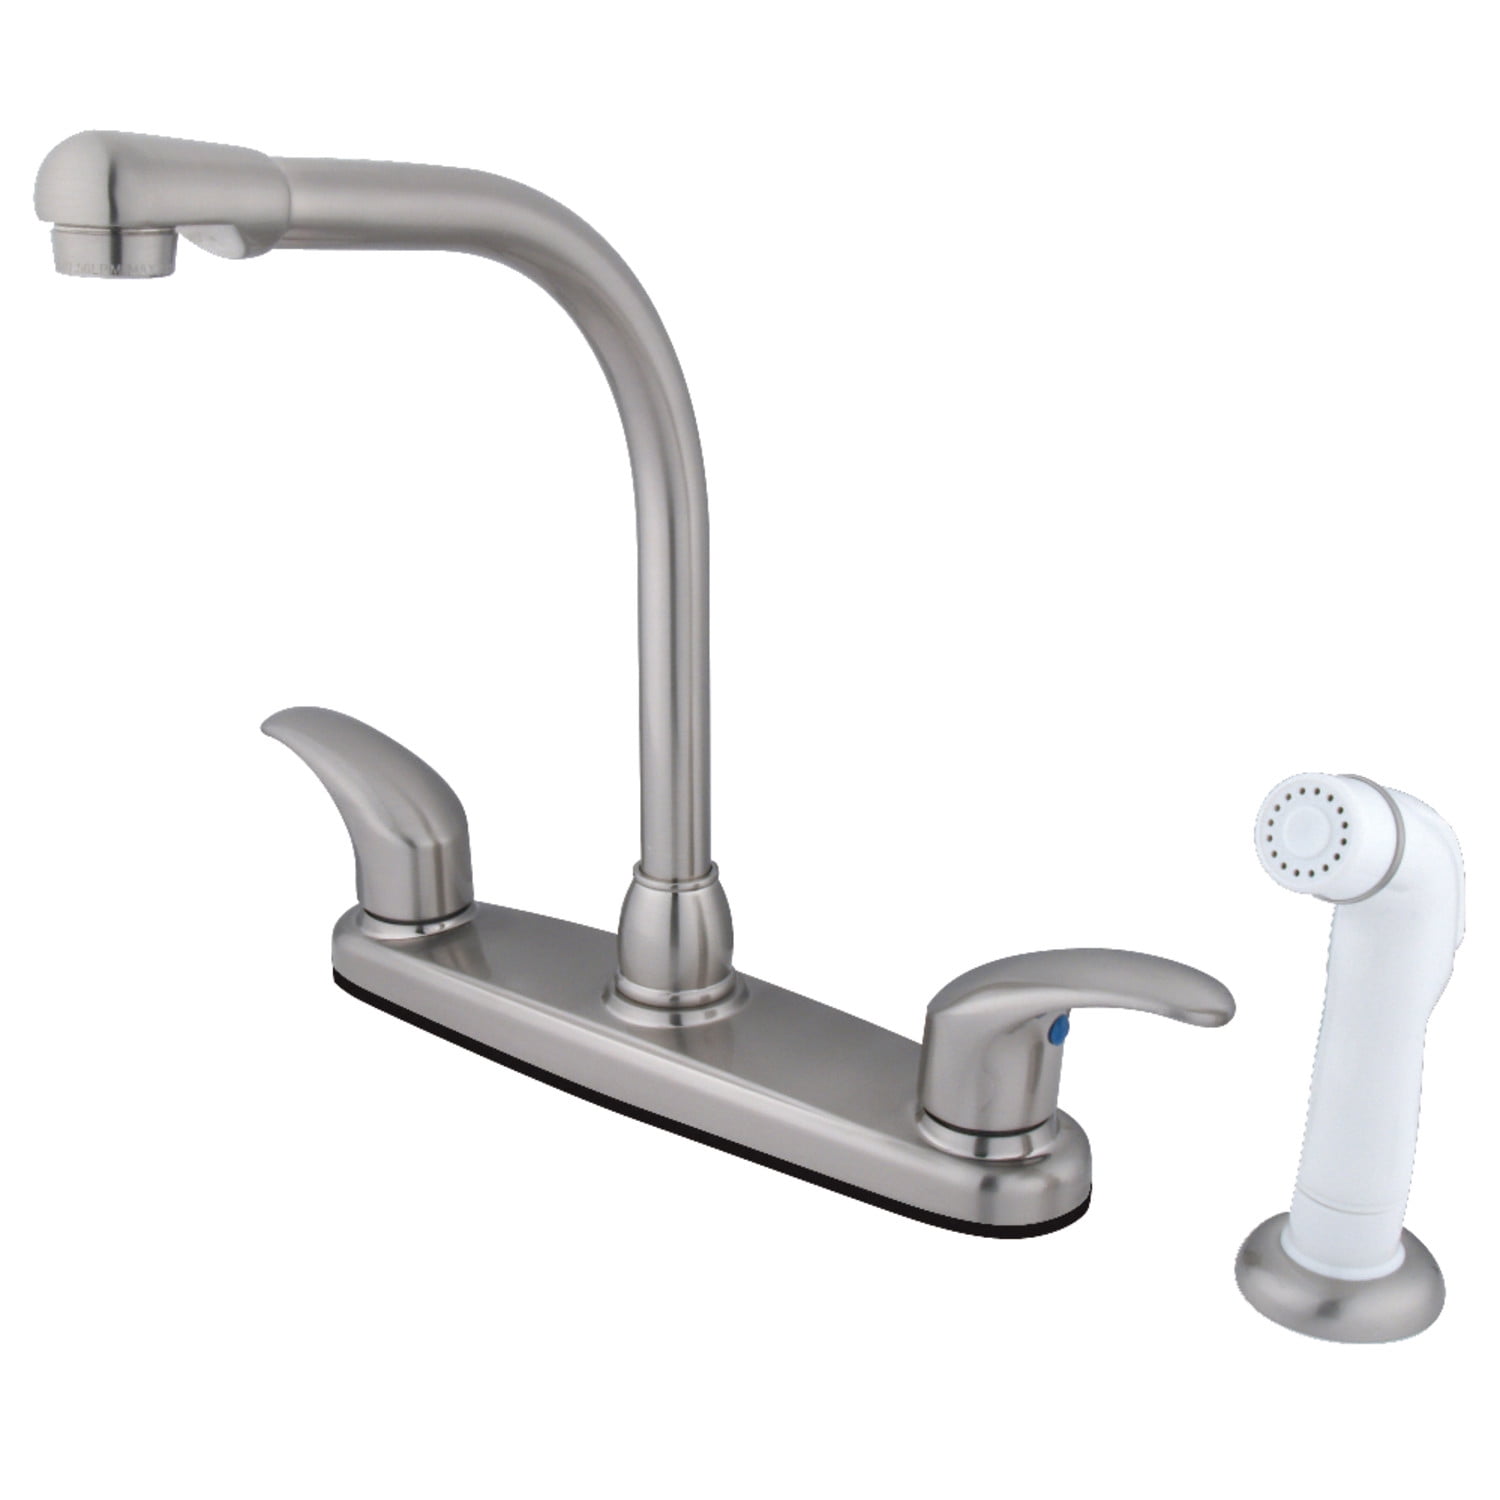 Kingston Brass FB718LL Legacy 8-Inch Centerset Kitchen Faucet with Sprayer, Brushed Nickel